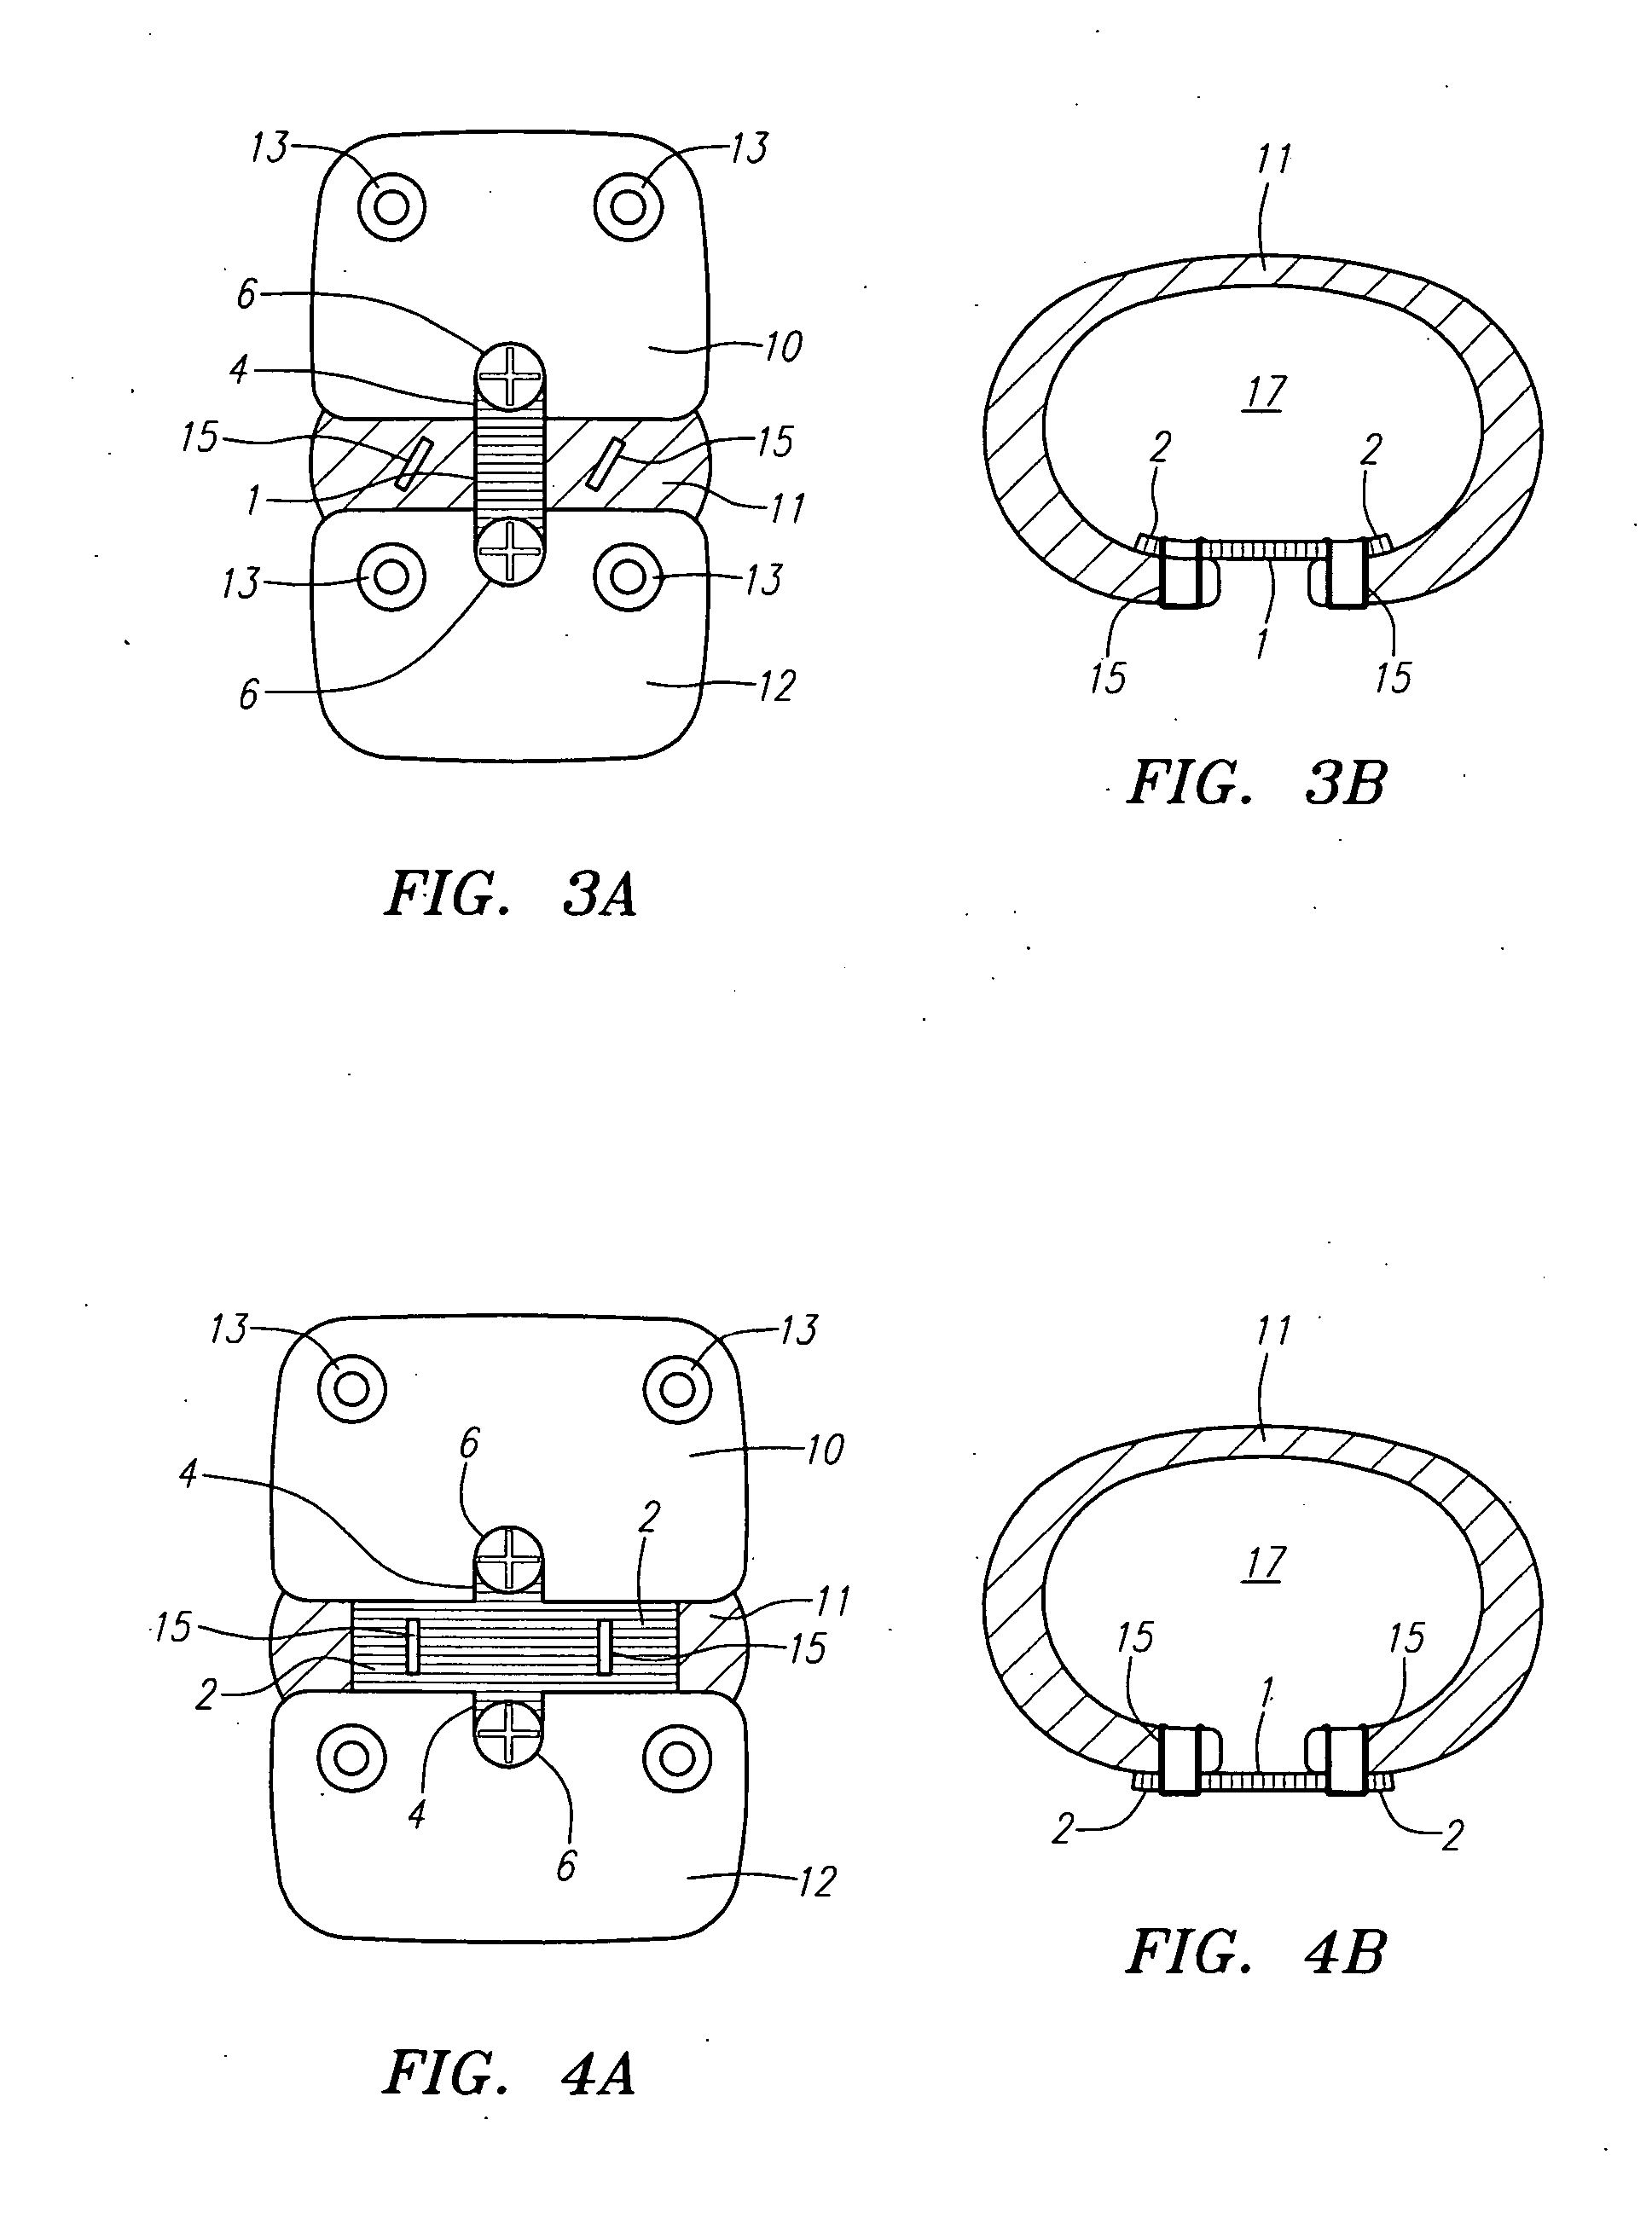 Methods and apparatus for reconstructing the anulus fibrosus